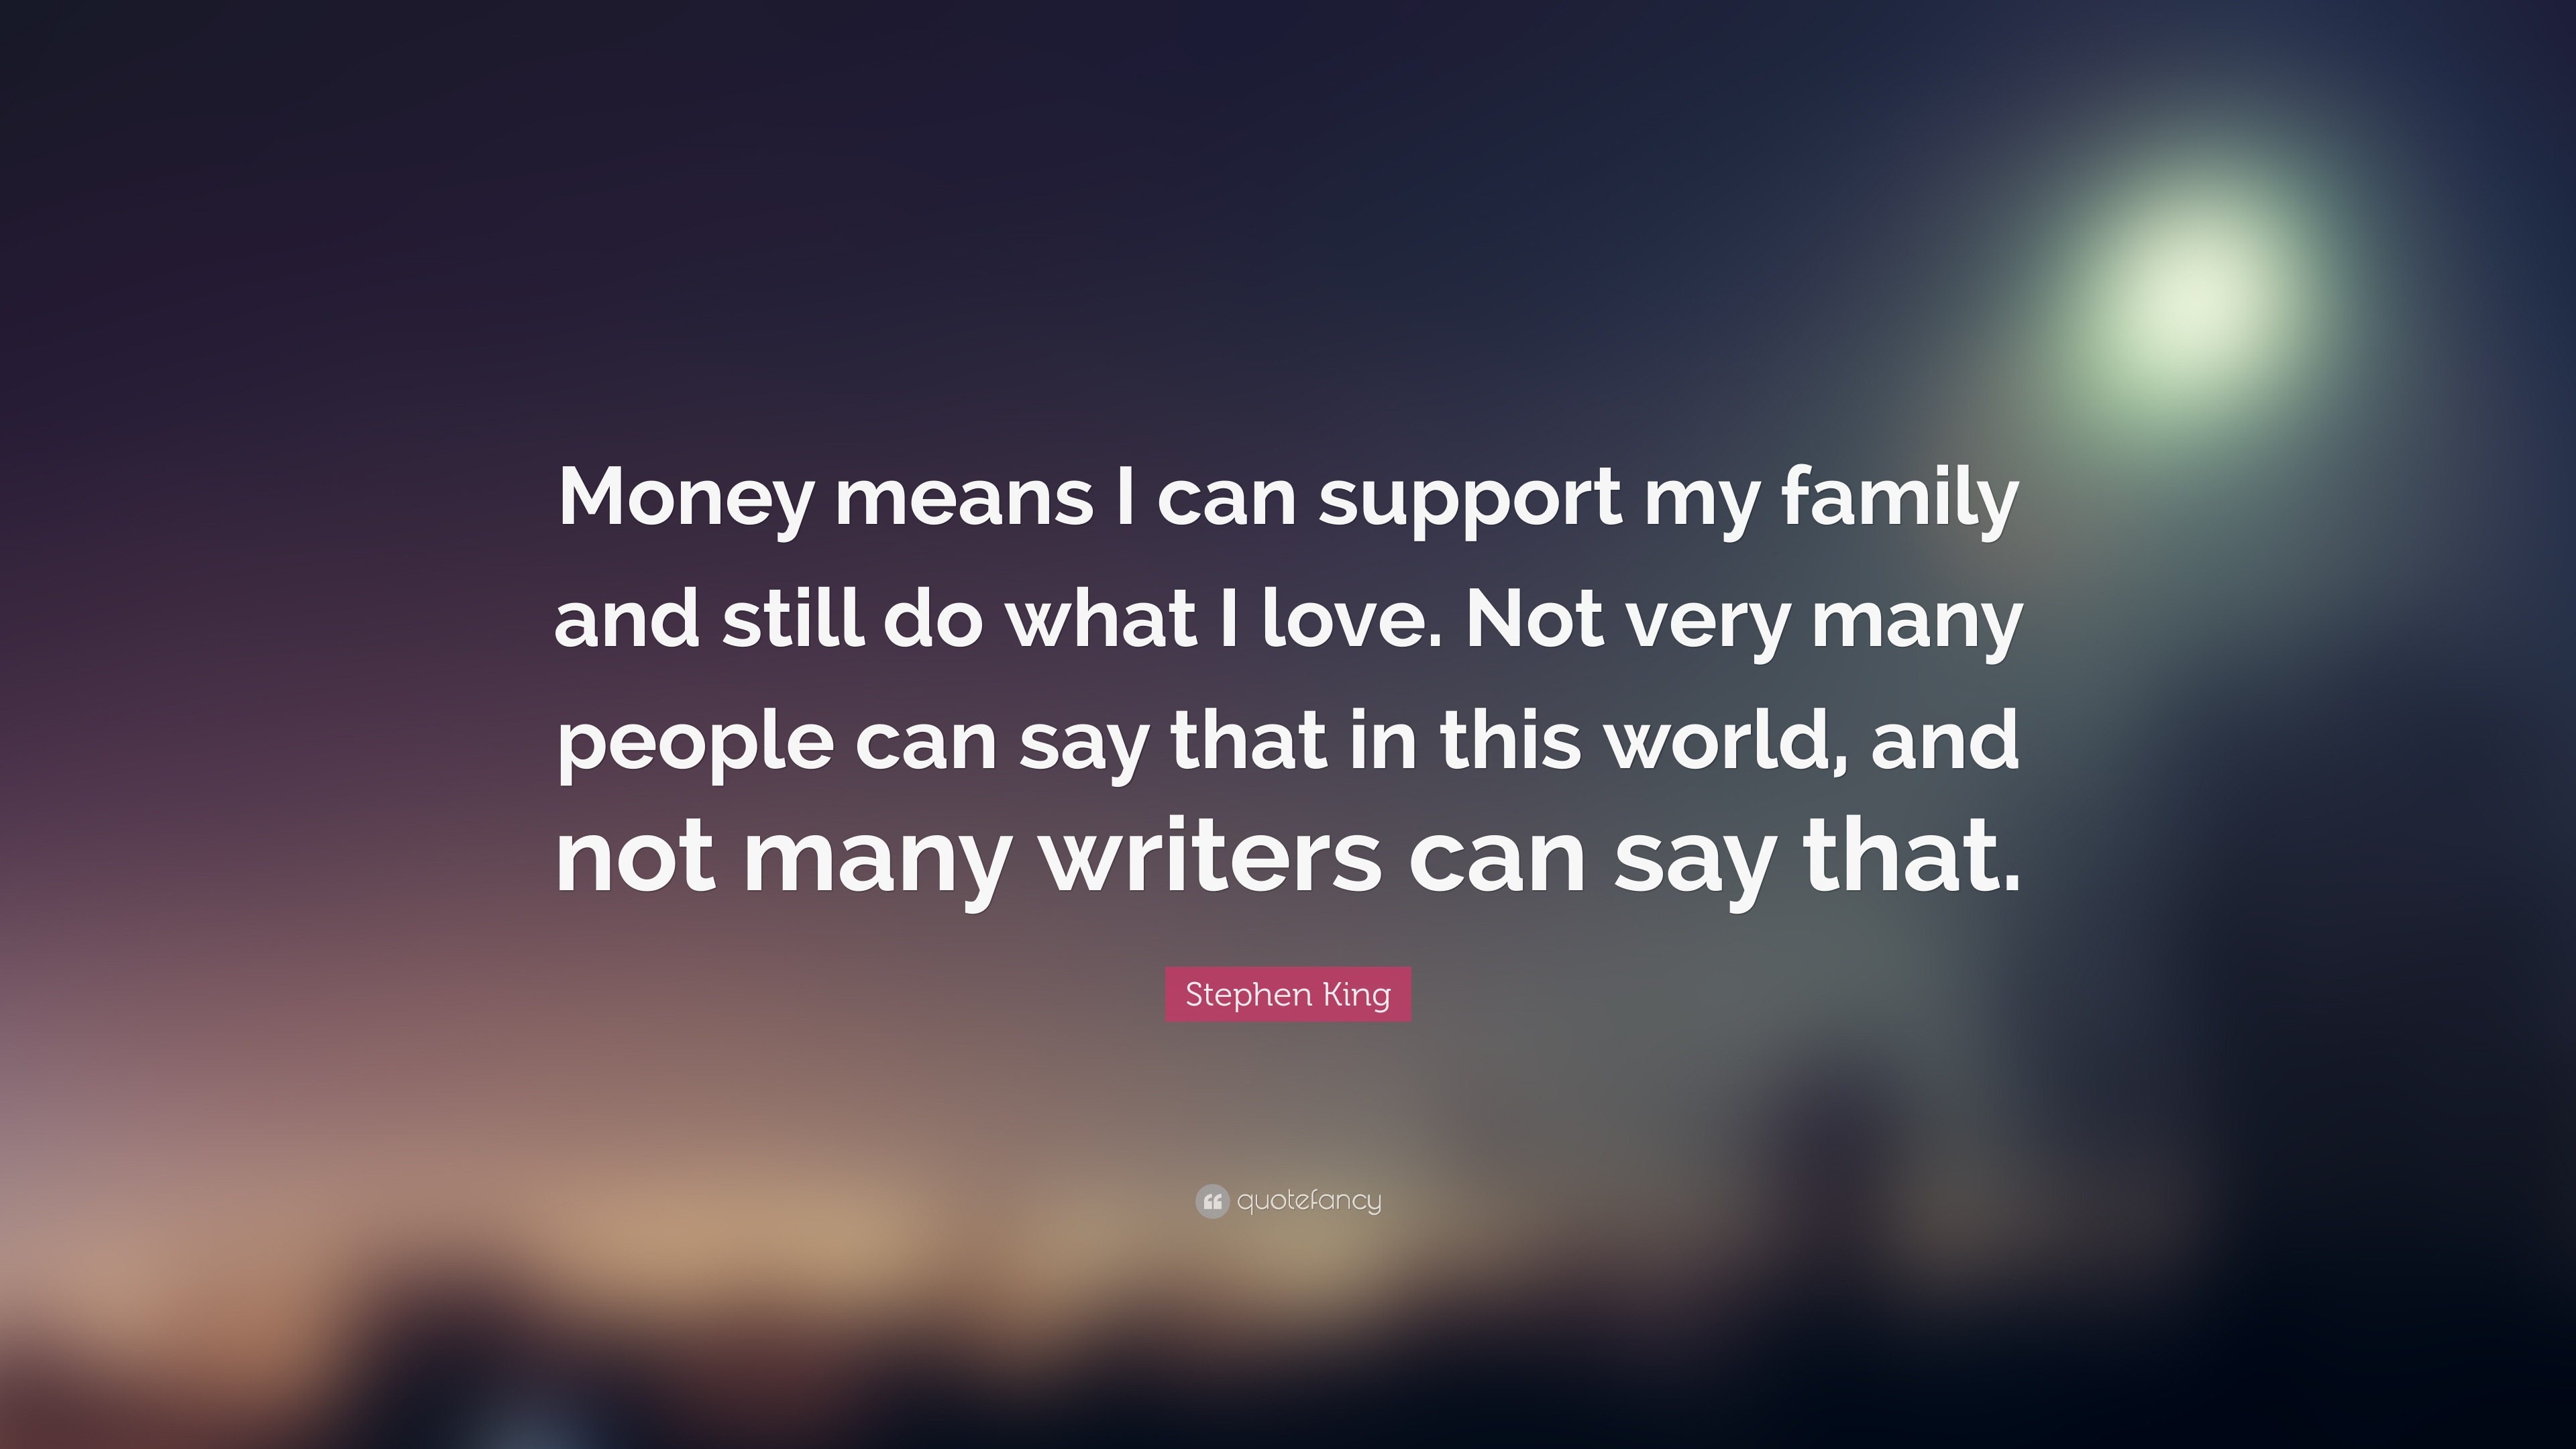 Stephen King Quote “Money means I can support my family and still do what